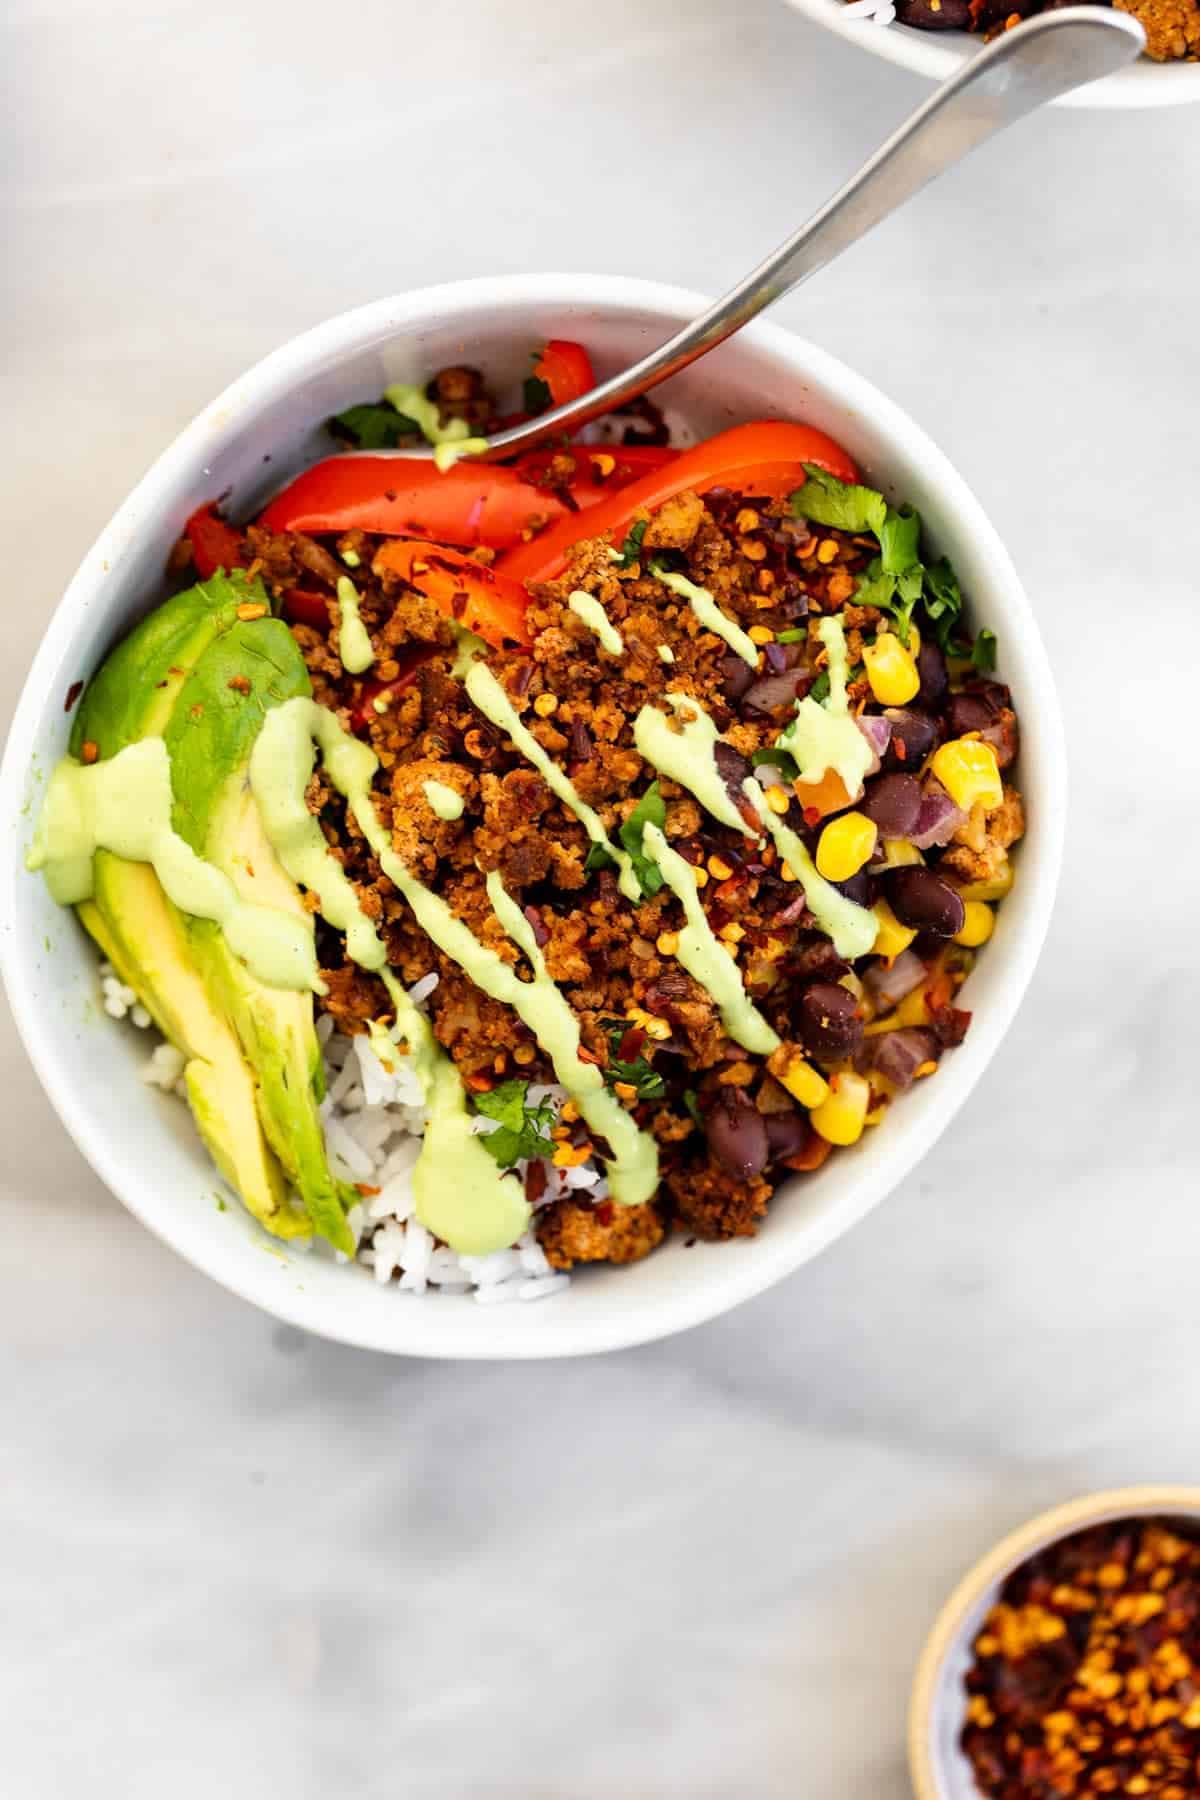 Taco bowl with walnut meat, veggies, beans, and rice.